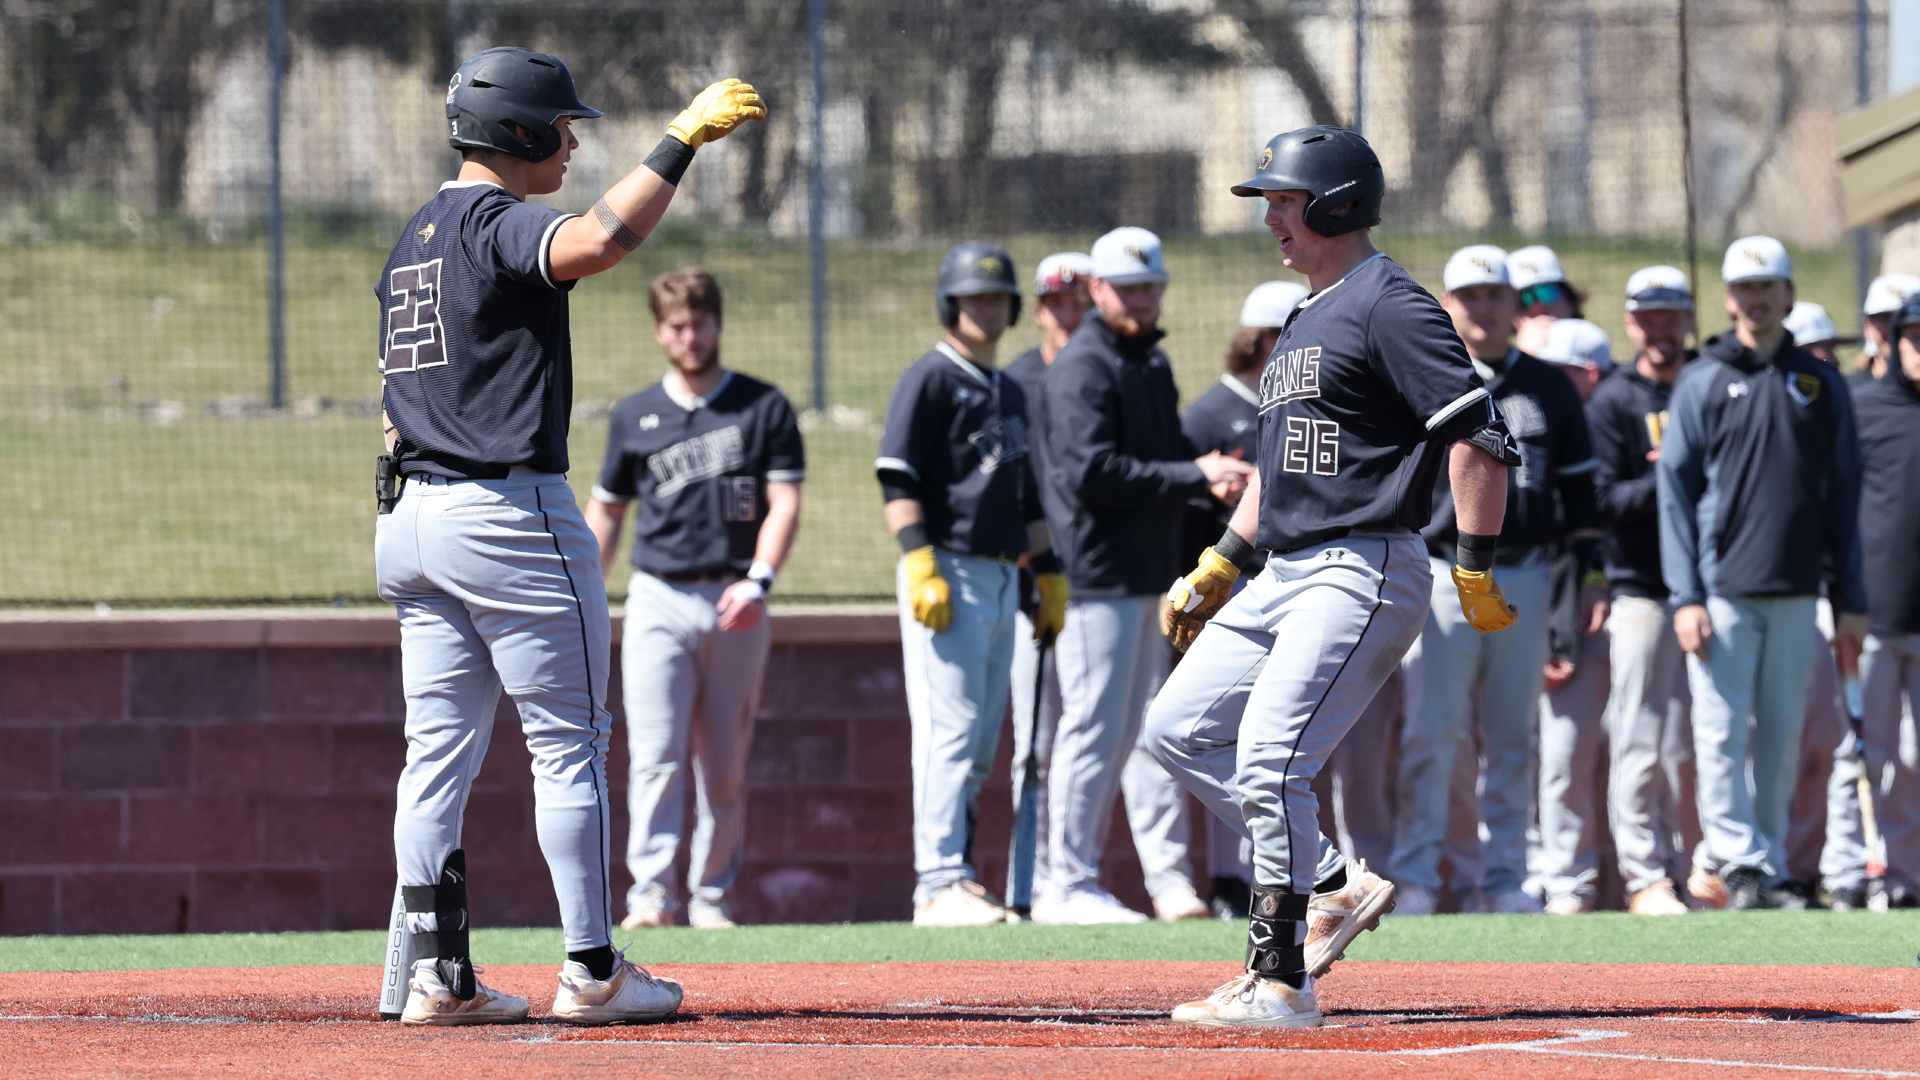 Mason Kirchberg (26) celebrates with Nick Shiu (23) after scoring a run against Whitewater on Saturday. Photo Credit: Steve Frommell, UW-Oshkosh Sports Information